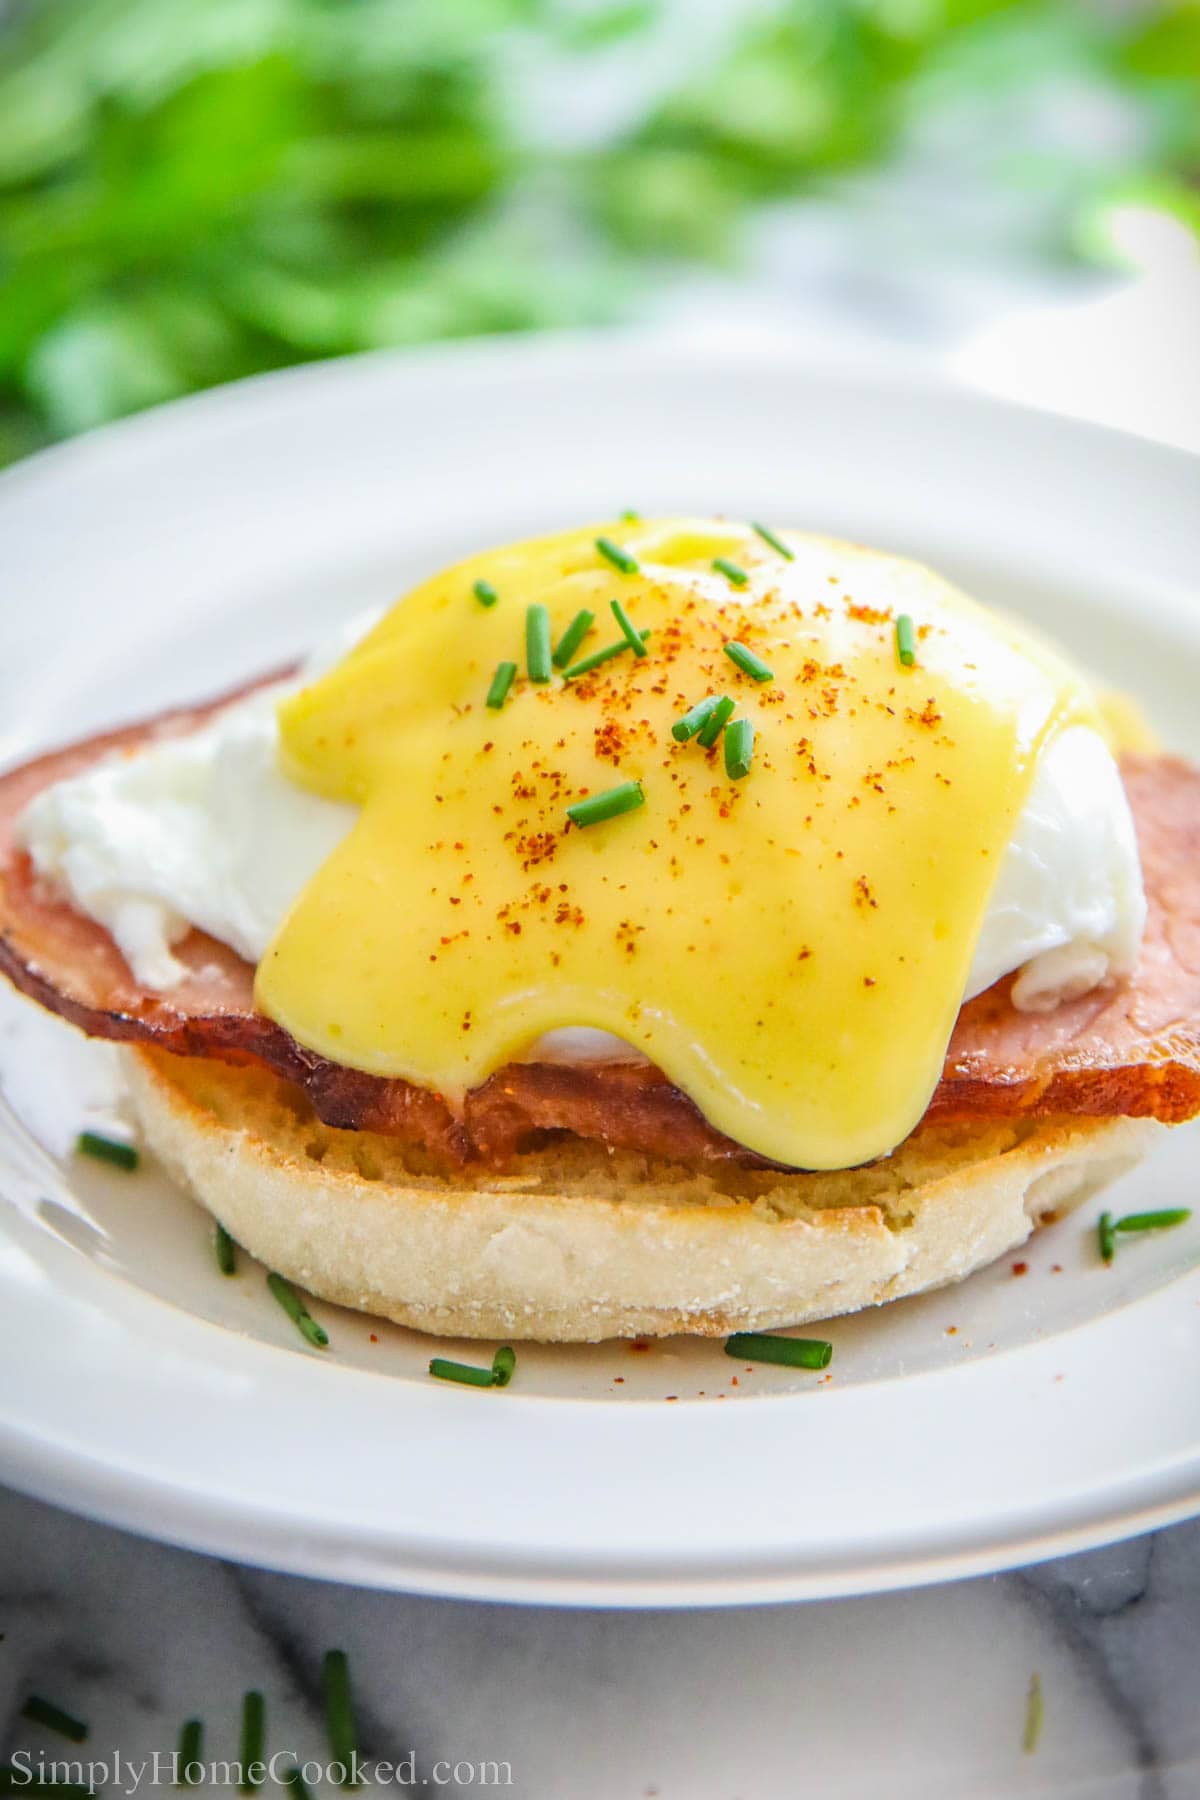 Eggs Benedict on an English muffin with Canadian bacon and poached egg and hollandaise sauce.